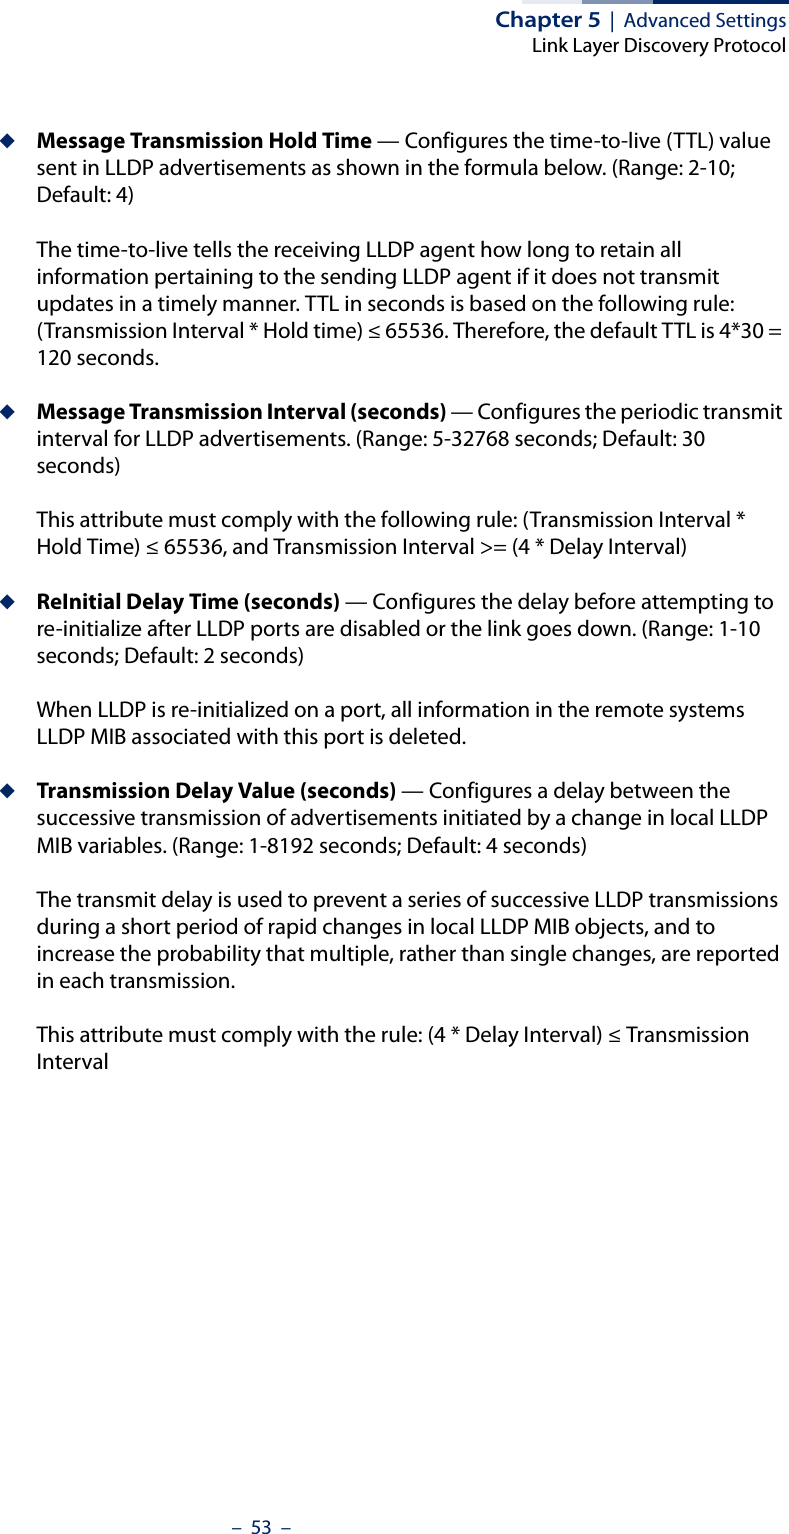 Chapter 5  |  Advanced SettingsLink Layer Discovery Protocol–  53  –◆Message Transmission Hold Time — Configures the time-to-live (TTL) value sent in LLDP advertisements as shown in the formula below. (Range: 2-10; Default: 4)The time-to-live tells the receiving LLDP agent how long to retain all information pertaining to the sending LLDP agent if it does not transmit updates in a timely manner. TTL in seconds is based on the following rule: (Transmission Interval * Hold time) ≤ 65536. Therefore, the default TTL is 4*30 = 120 seconds.◆Message Transmission Interval (seconds) — Configures the periodic transmit interval for LLDP advertisements. (Range: 5-32768 seconds; Default: 30 seconds)This attribute must comply with the following rule: (Transmission Interval * Hold Time) ≤ 65536, and Transmission Interval &gt;= (4 * Delay Interval)◆ReInitial Delay Time (seconds) — Configures the delay before attempting to re-initialize after LLDP ports are disabled or the link goes down. (Range: 1-10 seconds; Default: 2 seconds)When LLDP is re-initialized on a port, all information in the remote systems LLDP MIB associated with this port is deleted.◆Transmission Delay Value (seconds) — Configures a delay between the successive transmission of advertisements initiated by a change in local LLDP MIB variables. (Range: 1-8192 seconds; Default: 4 seconds)The transmit delay is used to prevent a series of successive LLDP transmissions during a short period of rapid changes in local LLDP MIB objects, and to increase the probability that multiple, rather than single changes, are reported in each transmission.This attribute must comply with the rule: (4 * Delay Interval) ≤ Transmission Interval